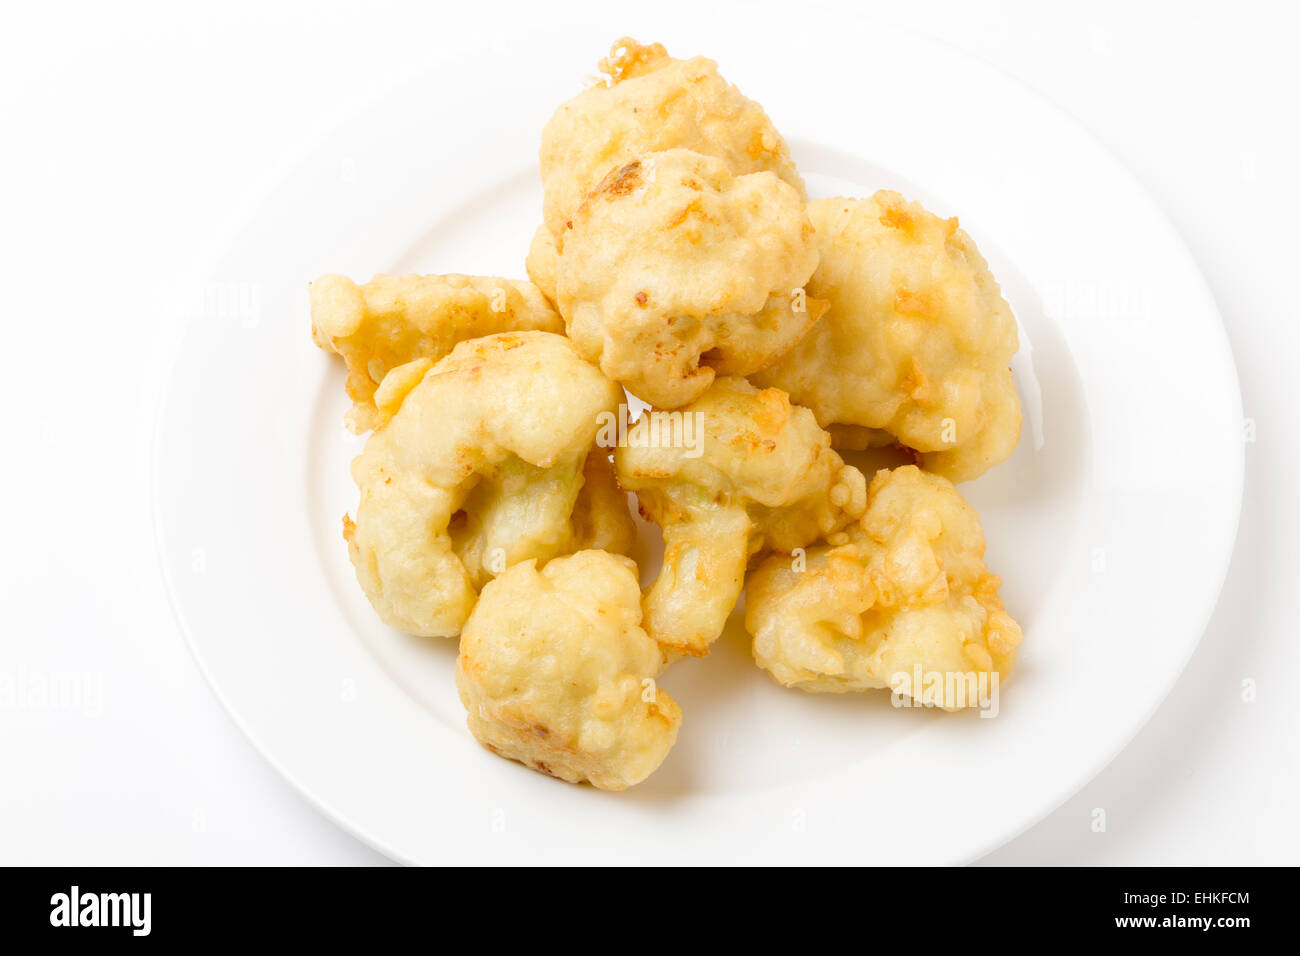 Florets of cauliflower parboiled then dipped in batter and deep fried Stock Photo